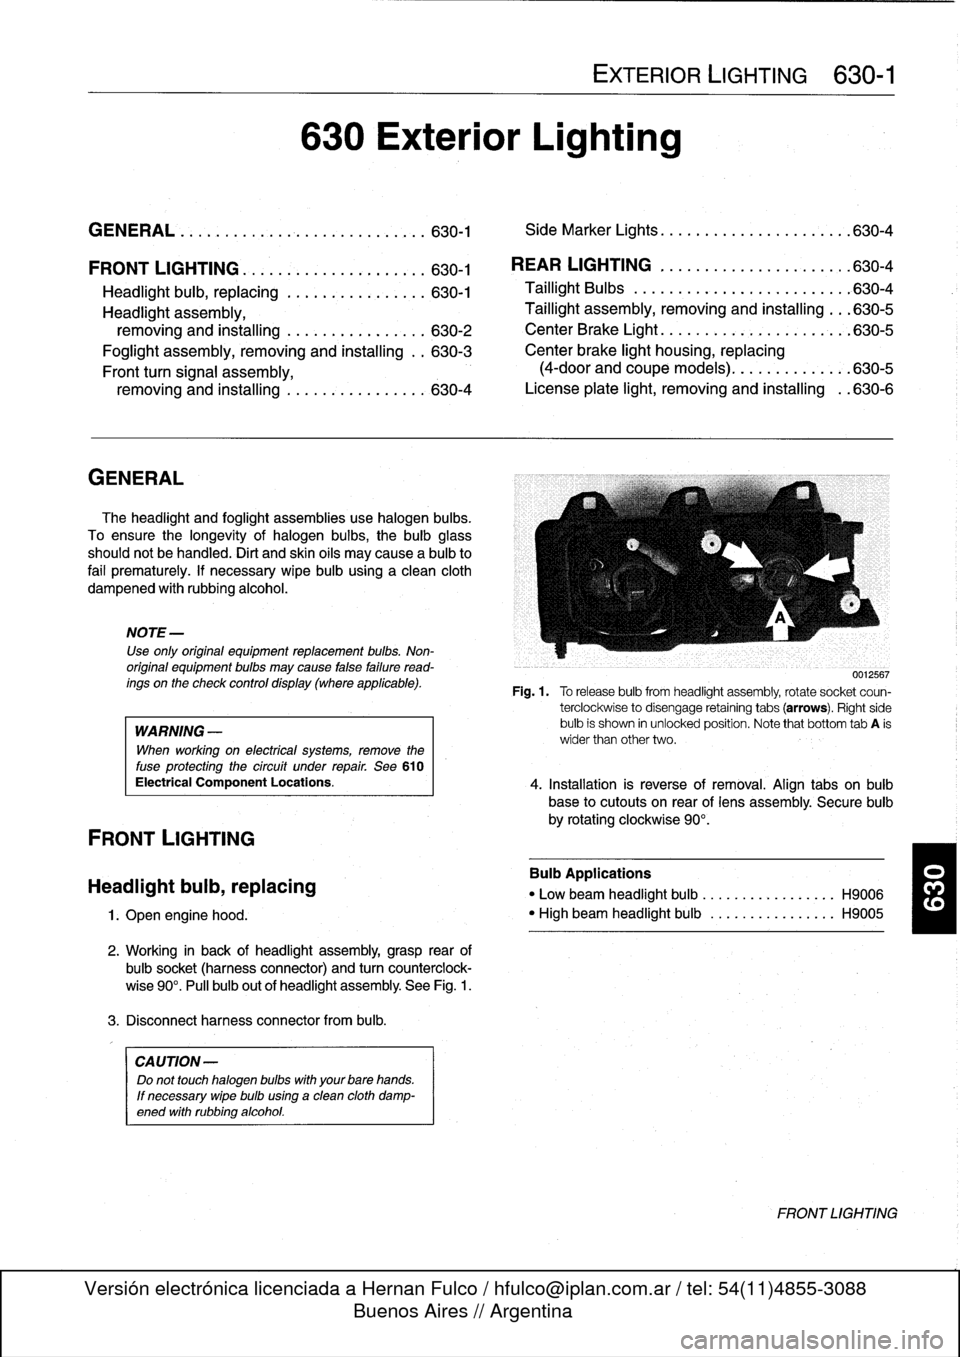 BMW 323i 1997 E36 Workshop Manual 
FRONT
LIGHTING
.
...........
.
....
.
.
.
.
630-1

Headlight
buib,
replacing
............
.
.
.
.
630-1
Headlight
assembly,

removing
and
installing
.......
.
....
.
.
.
.
630-2

Foglight
assembly,
r